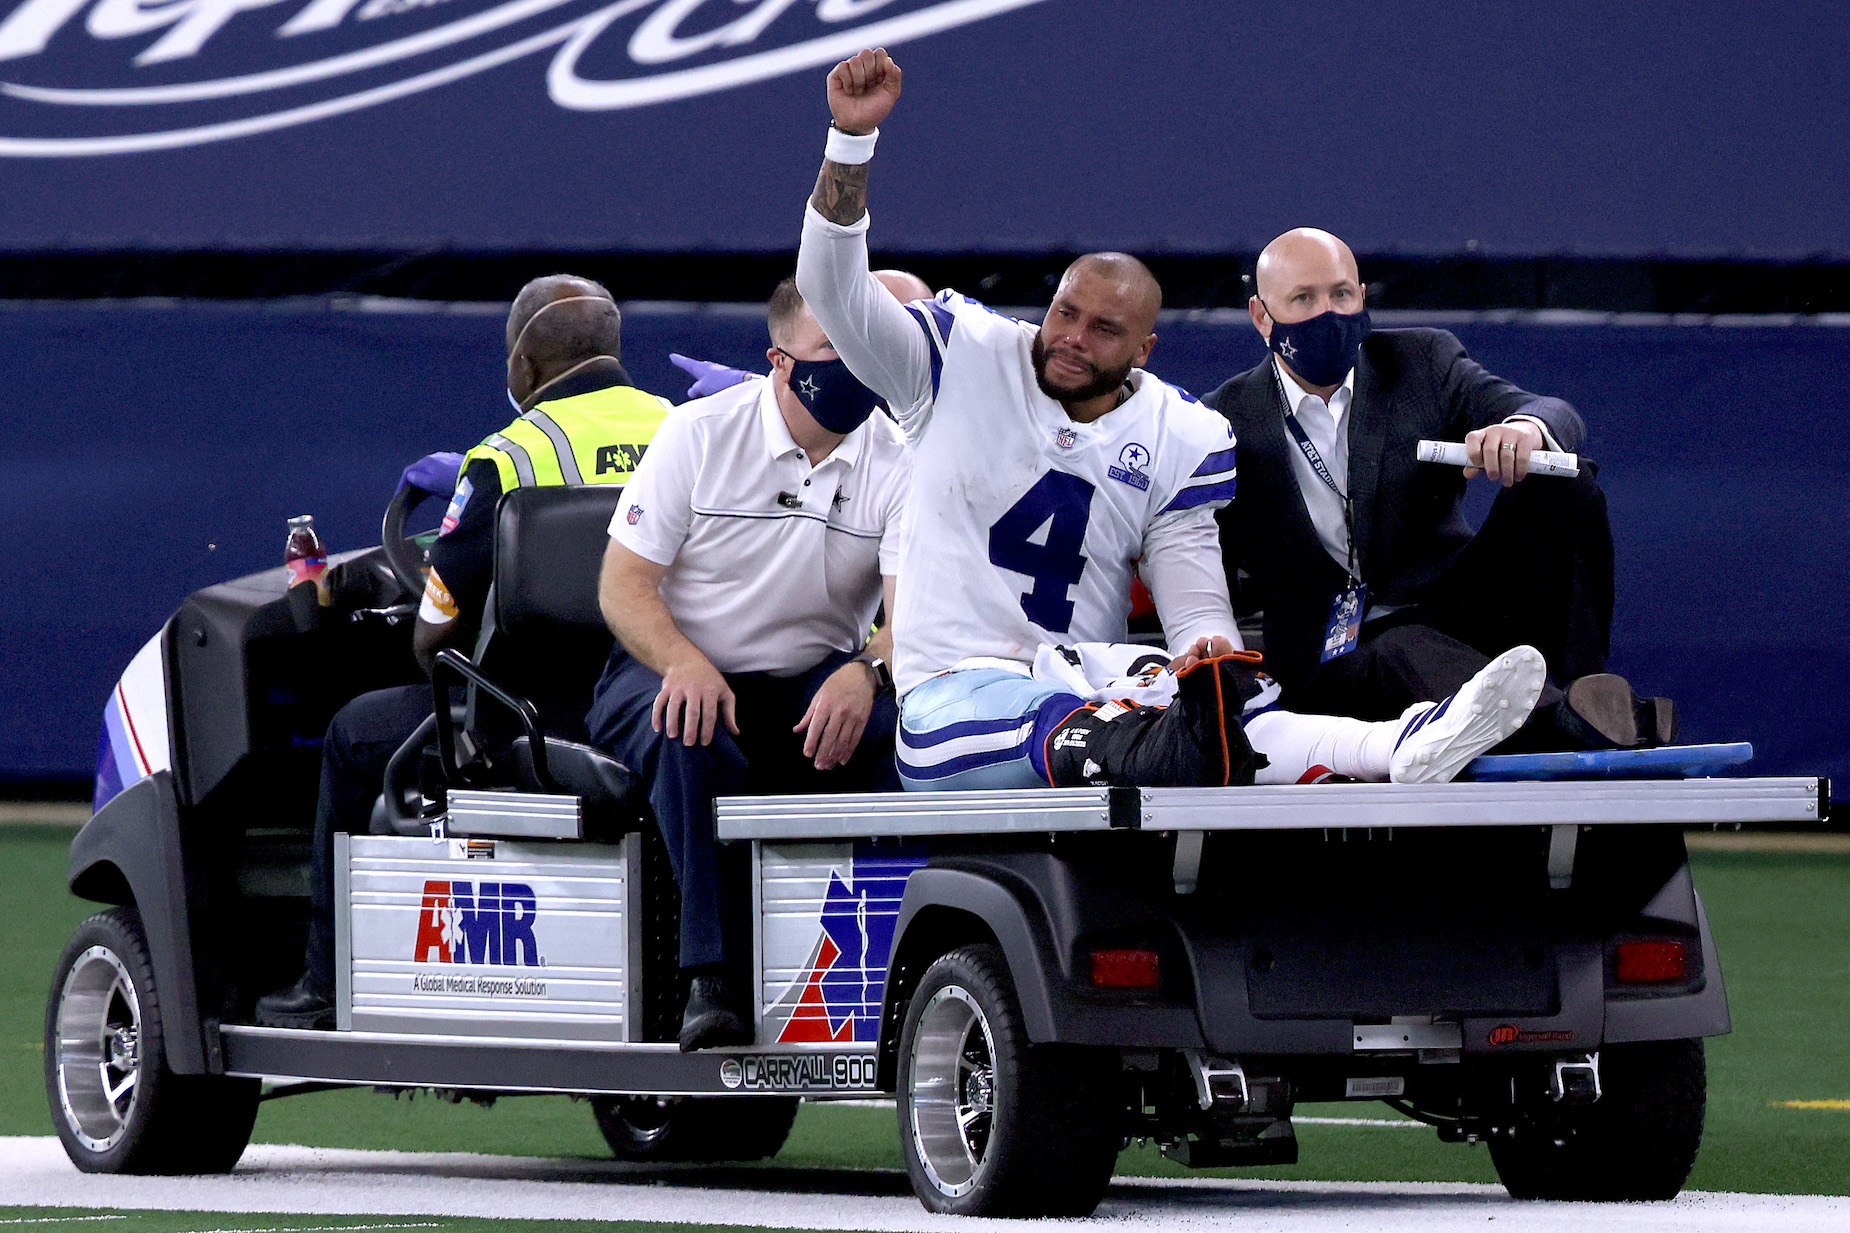 While Dak Prescott's ankle injury was gruesome, Jerry Jones is already overreacting.